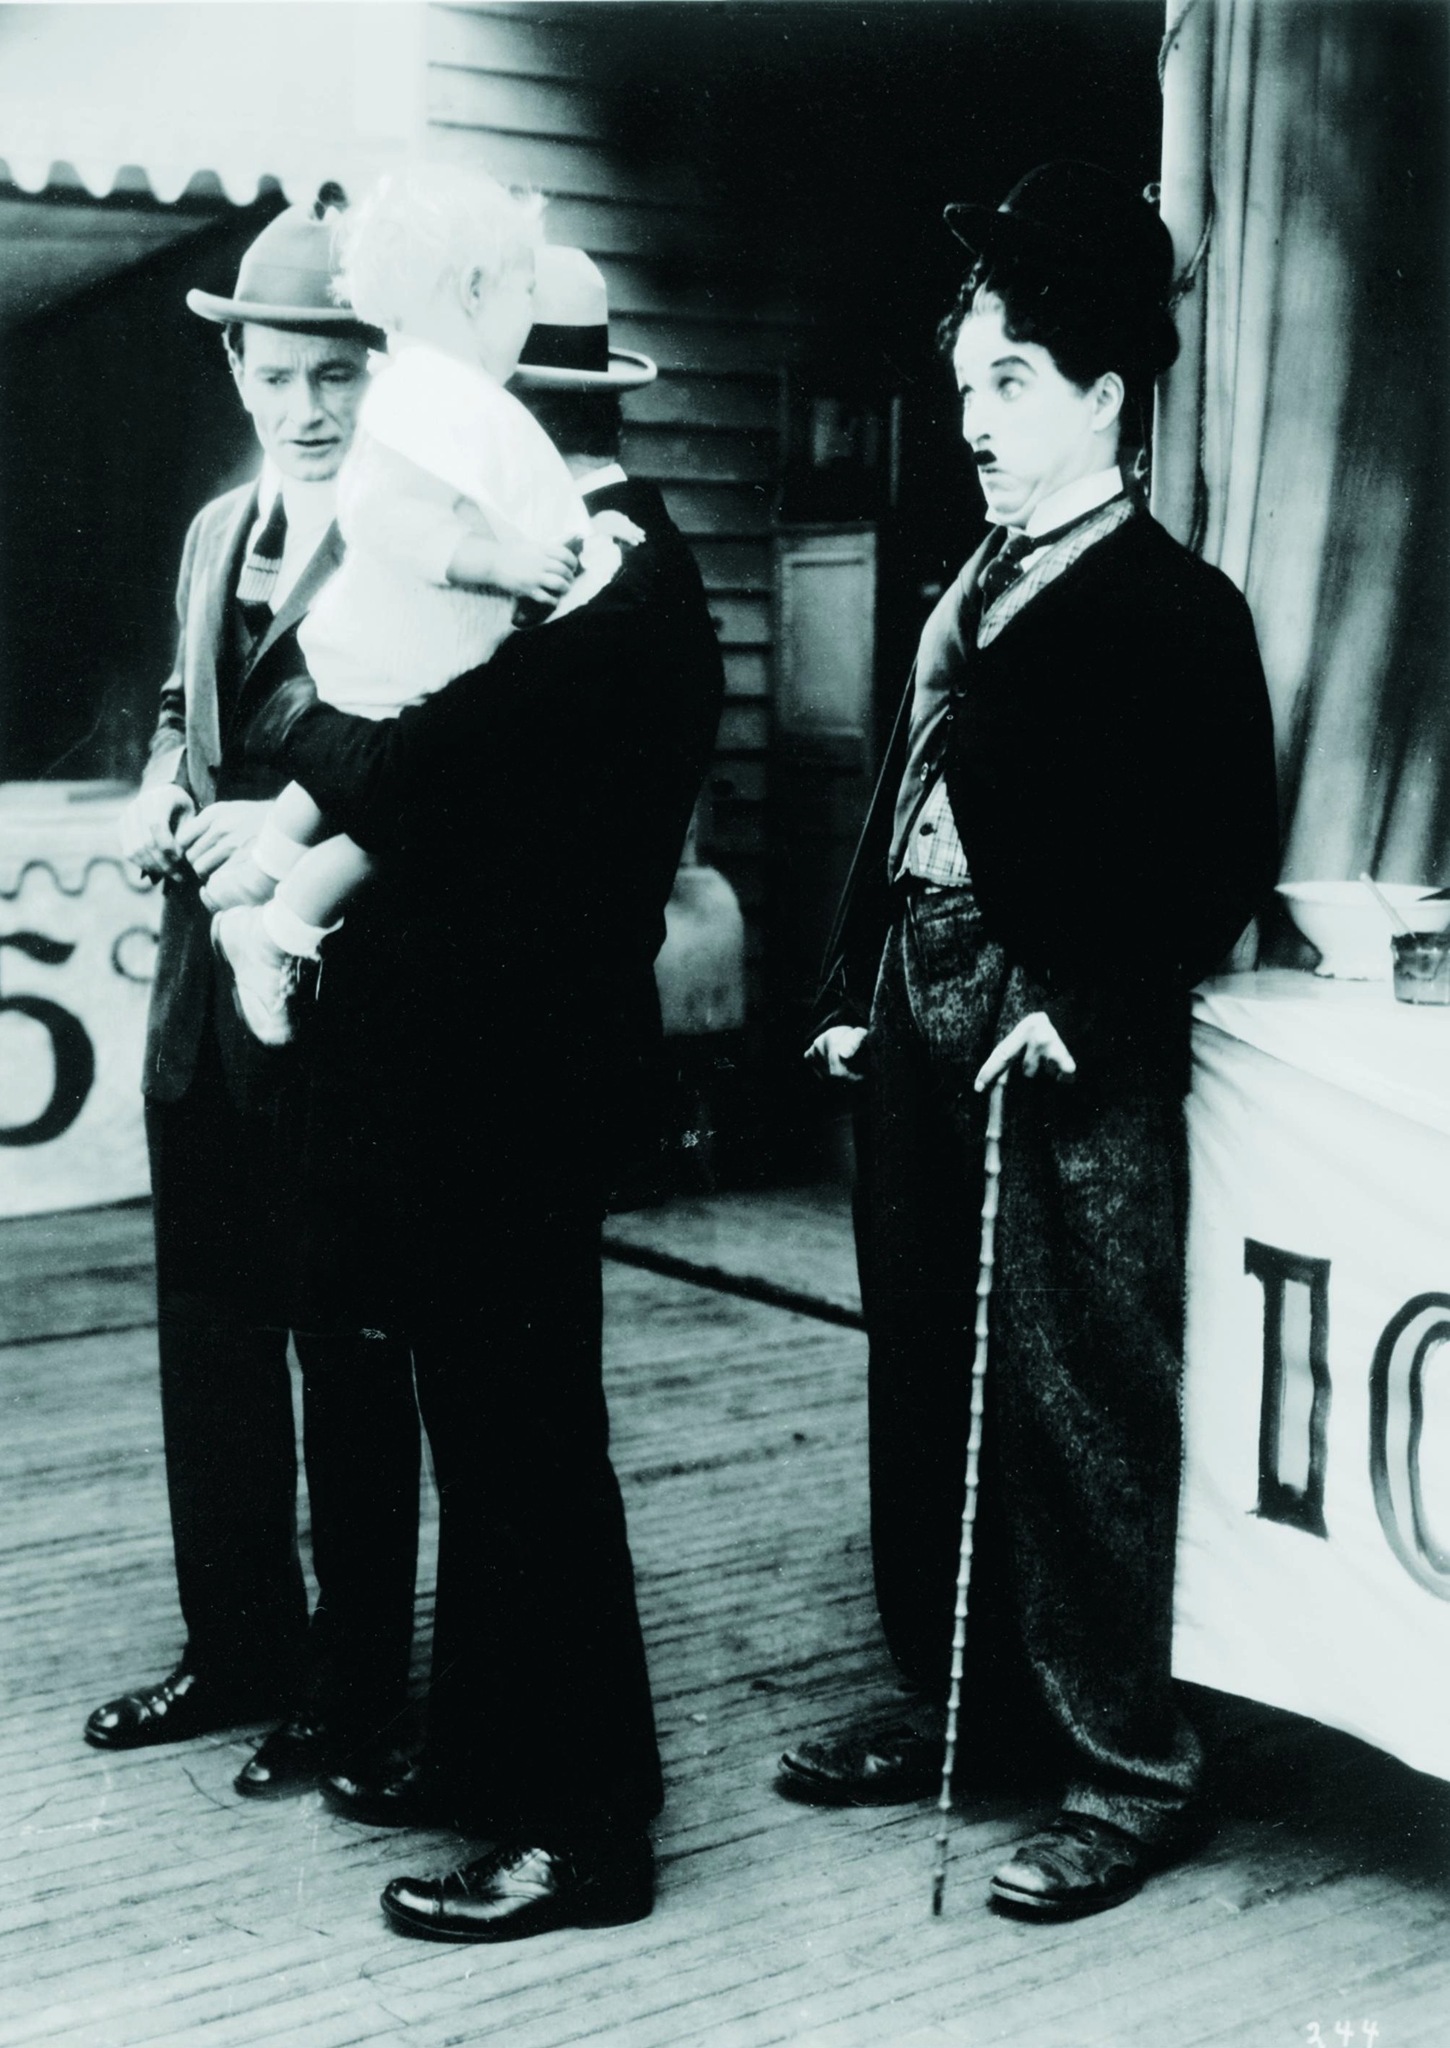 Still of Charles Chaplin in The Circus (1928)